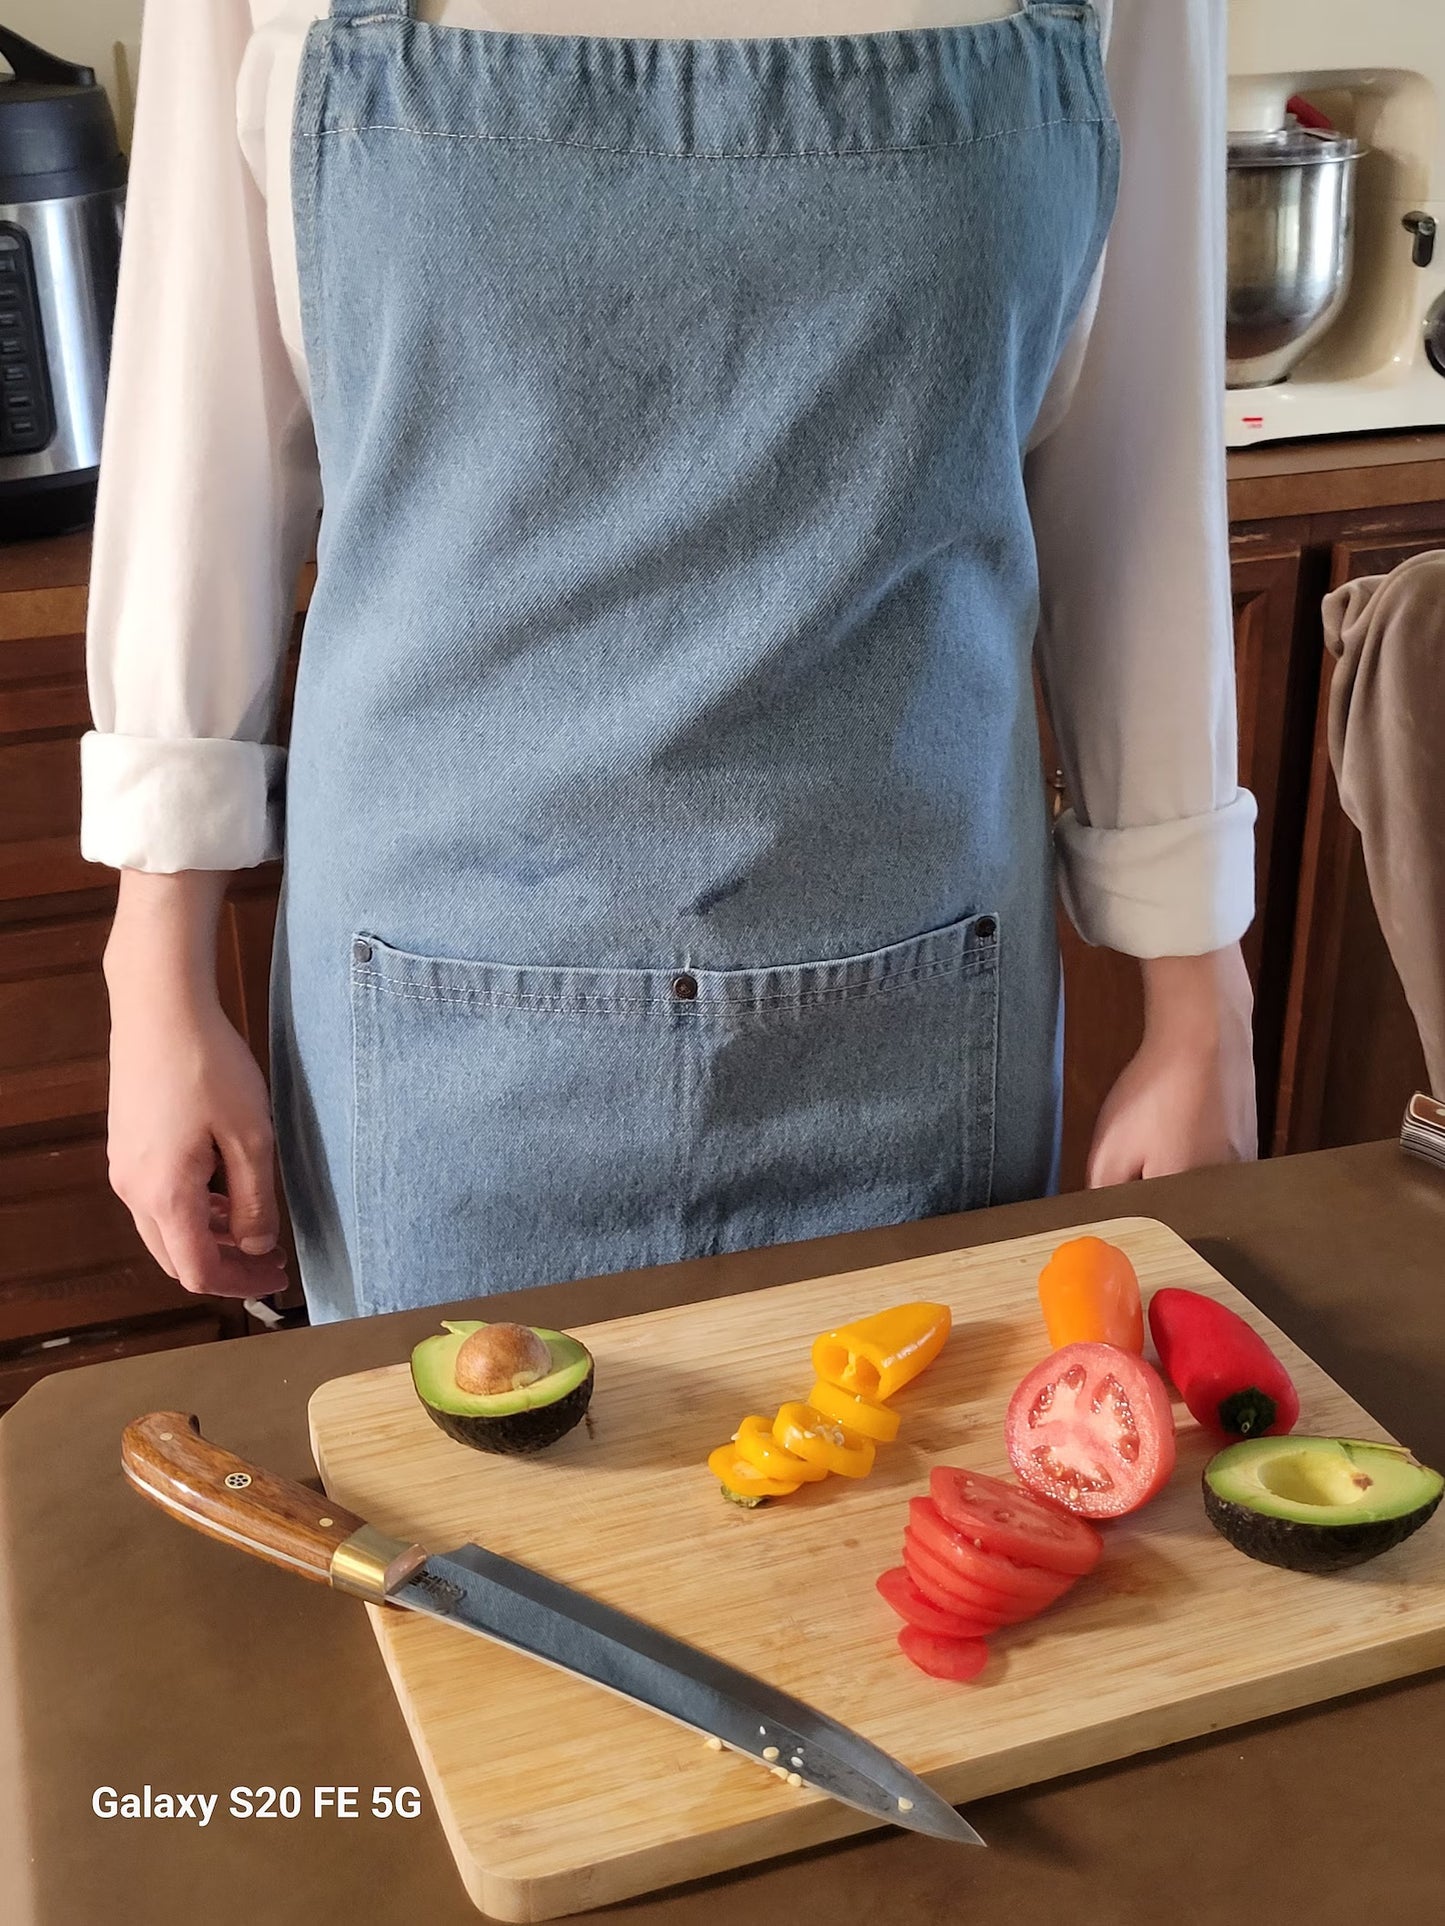 Custom Baking Queen Apron: Personalized Denim Apron with Pockets for Women and Men - Perfect Kitchen Companion!